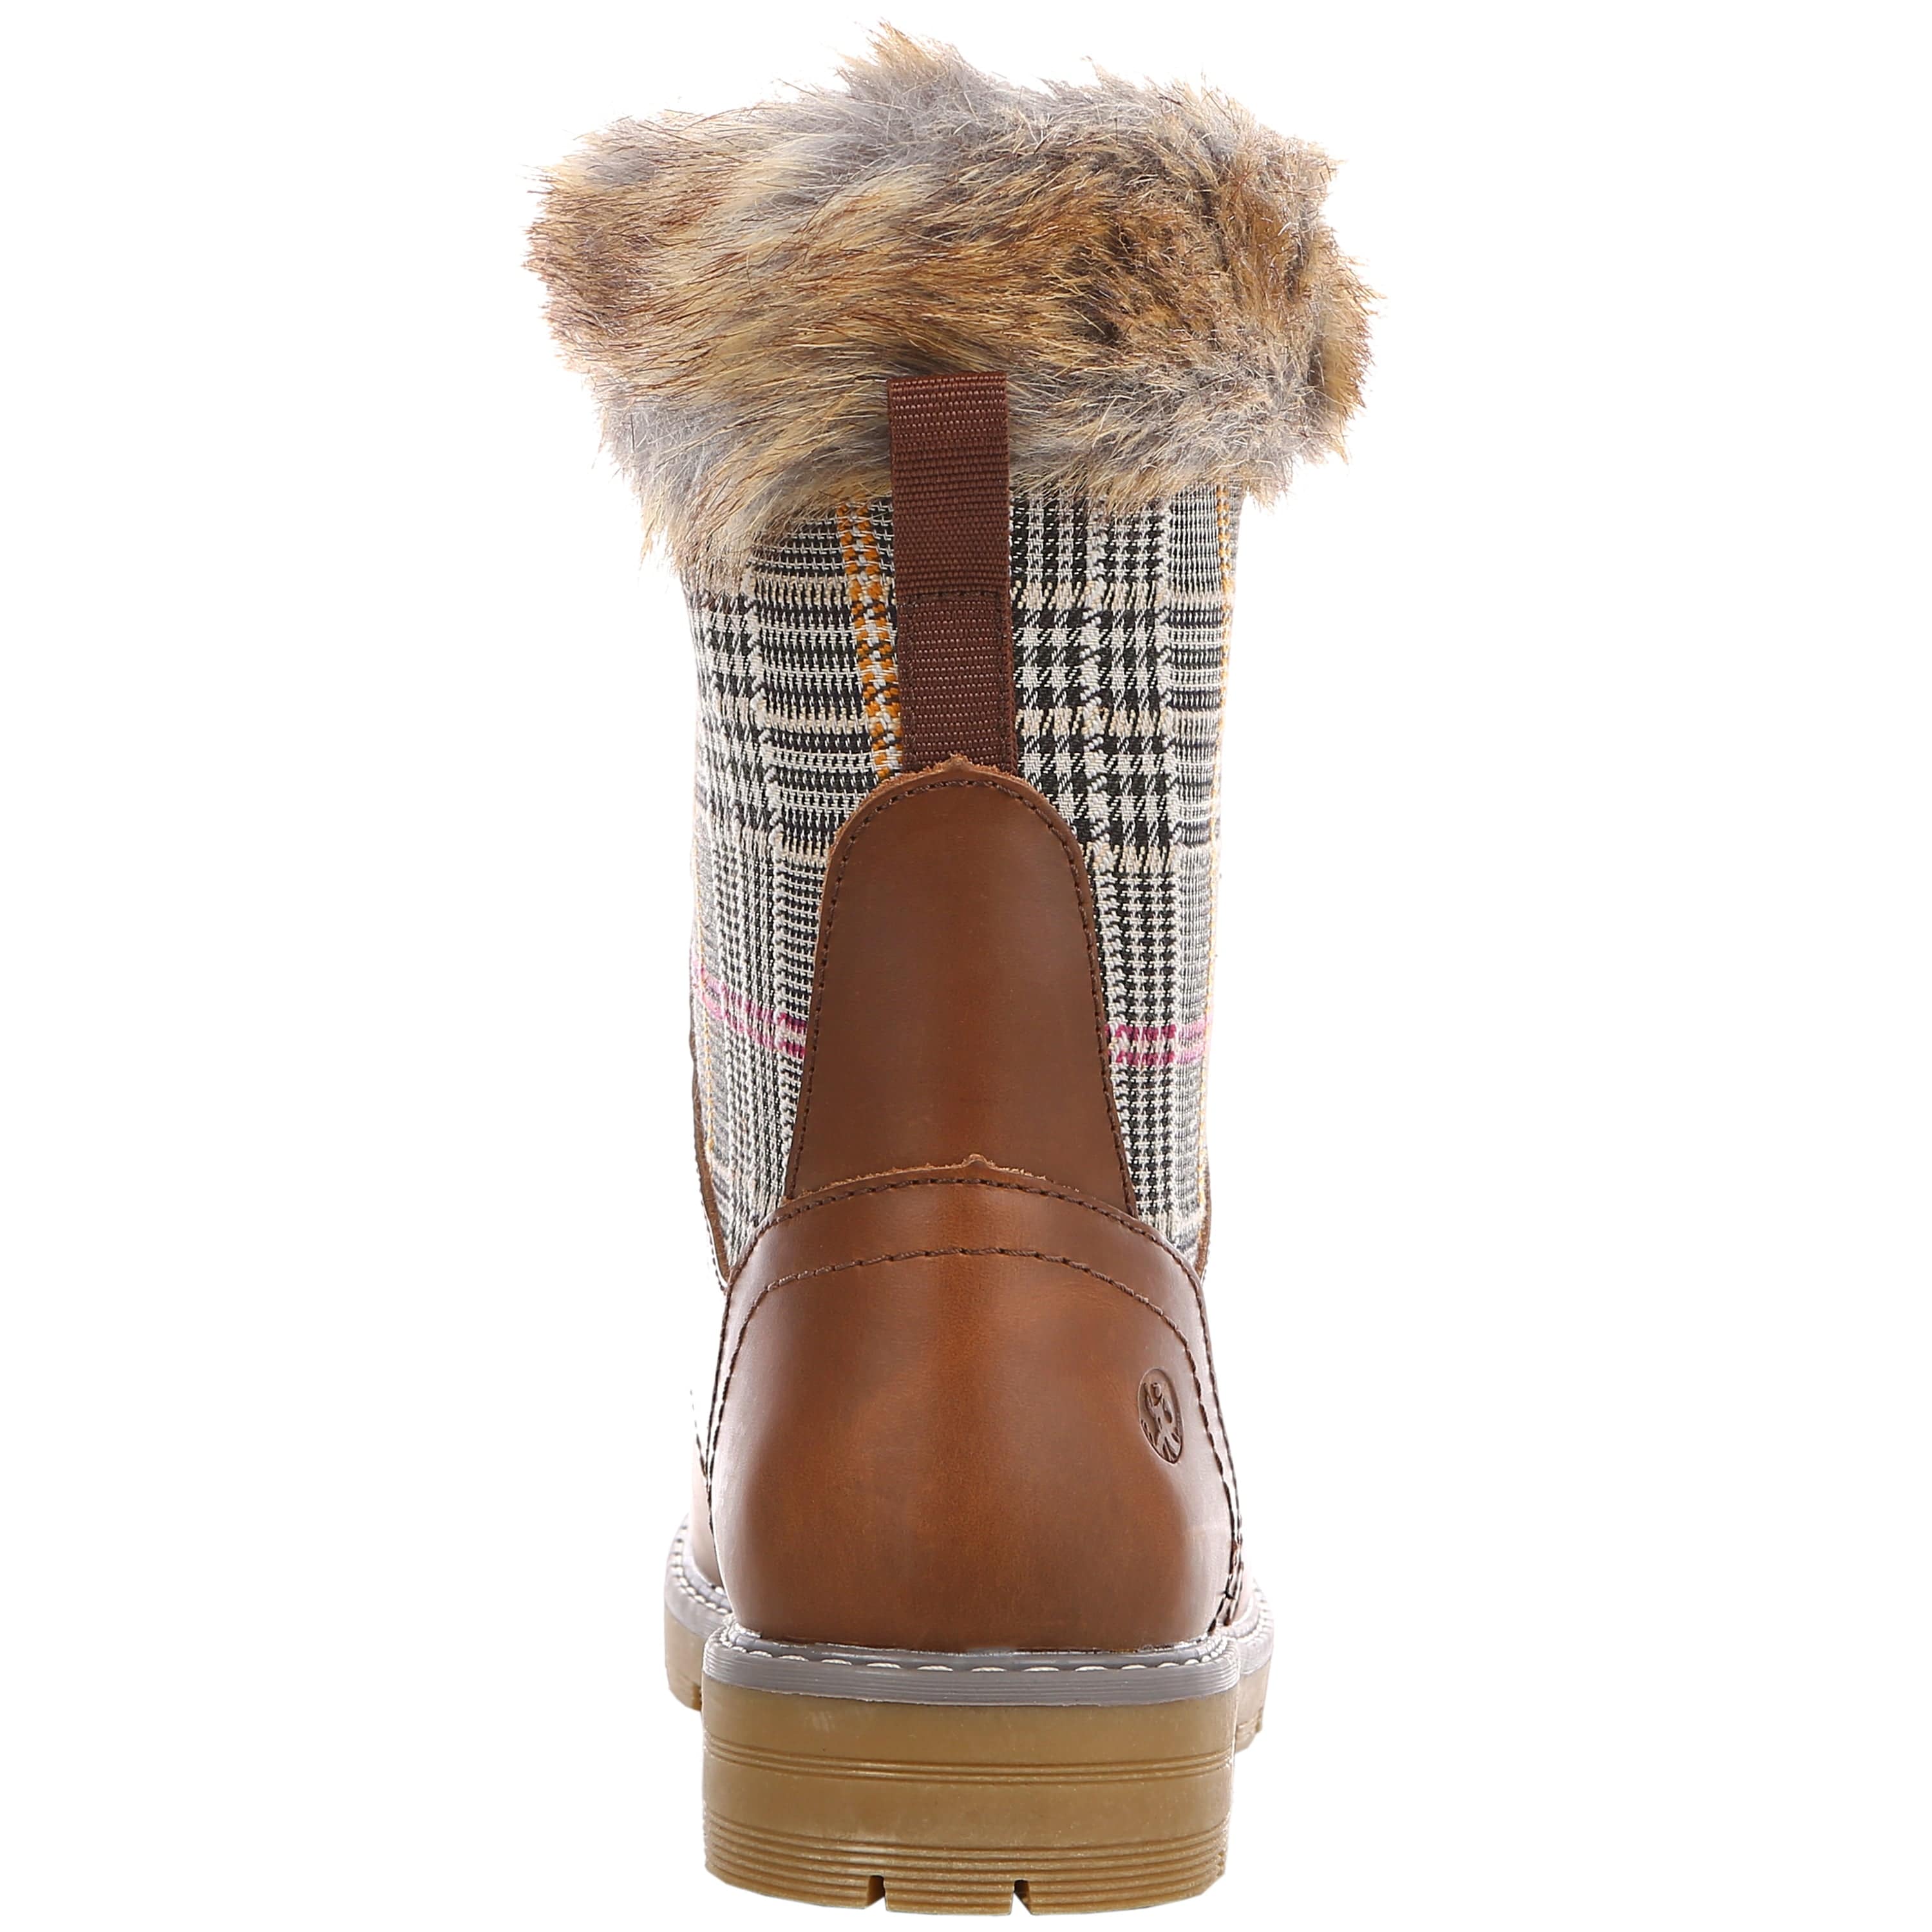 fur and quilt snow boots for women winter boots waterproof